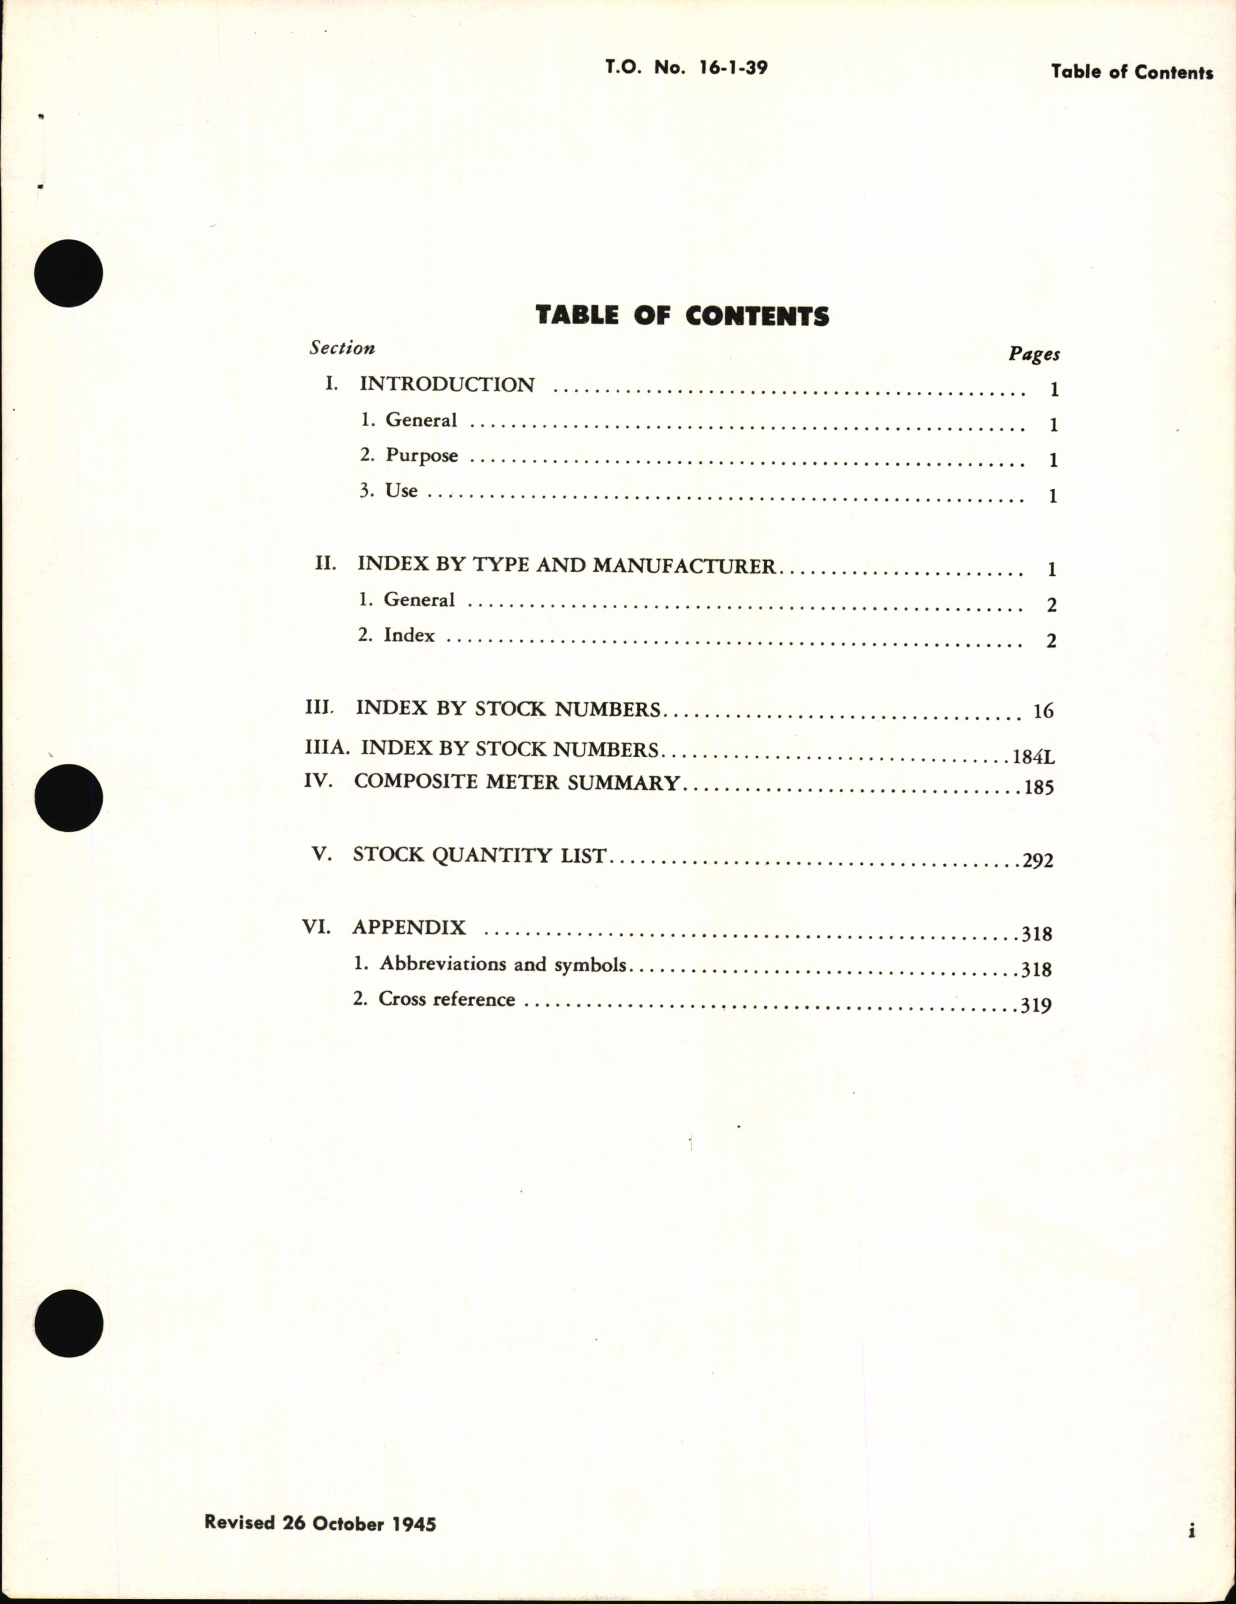 Sample page 5 from AirCorps Library document: Characteristics and Parts List for Electrical Meters Used in Communications Equipment